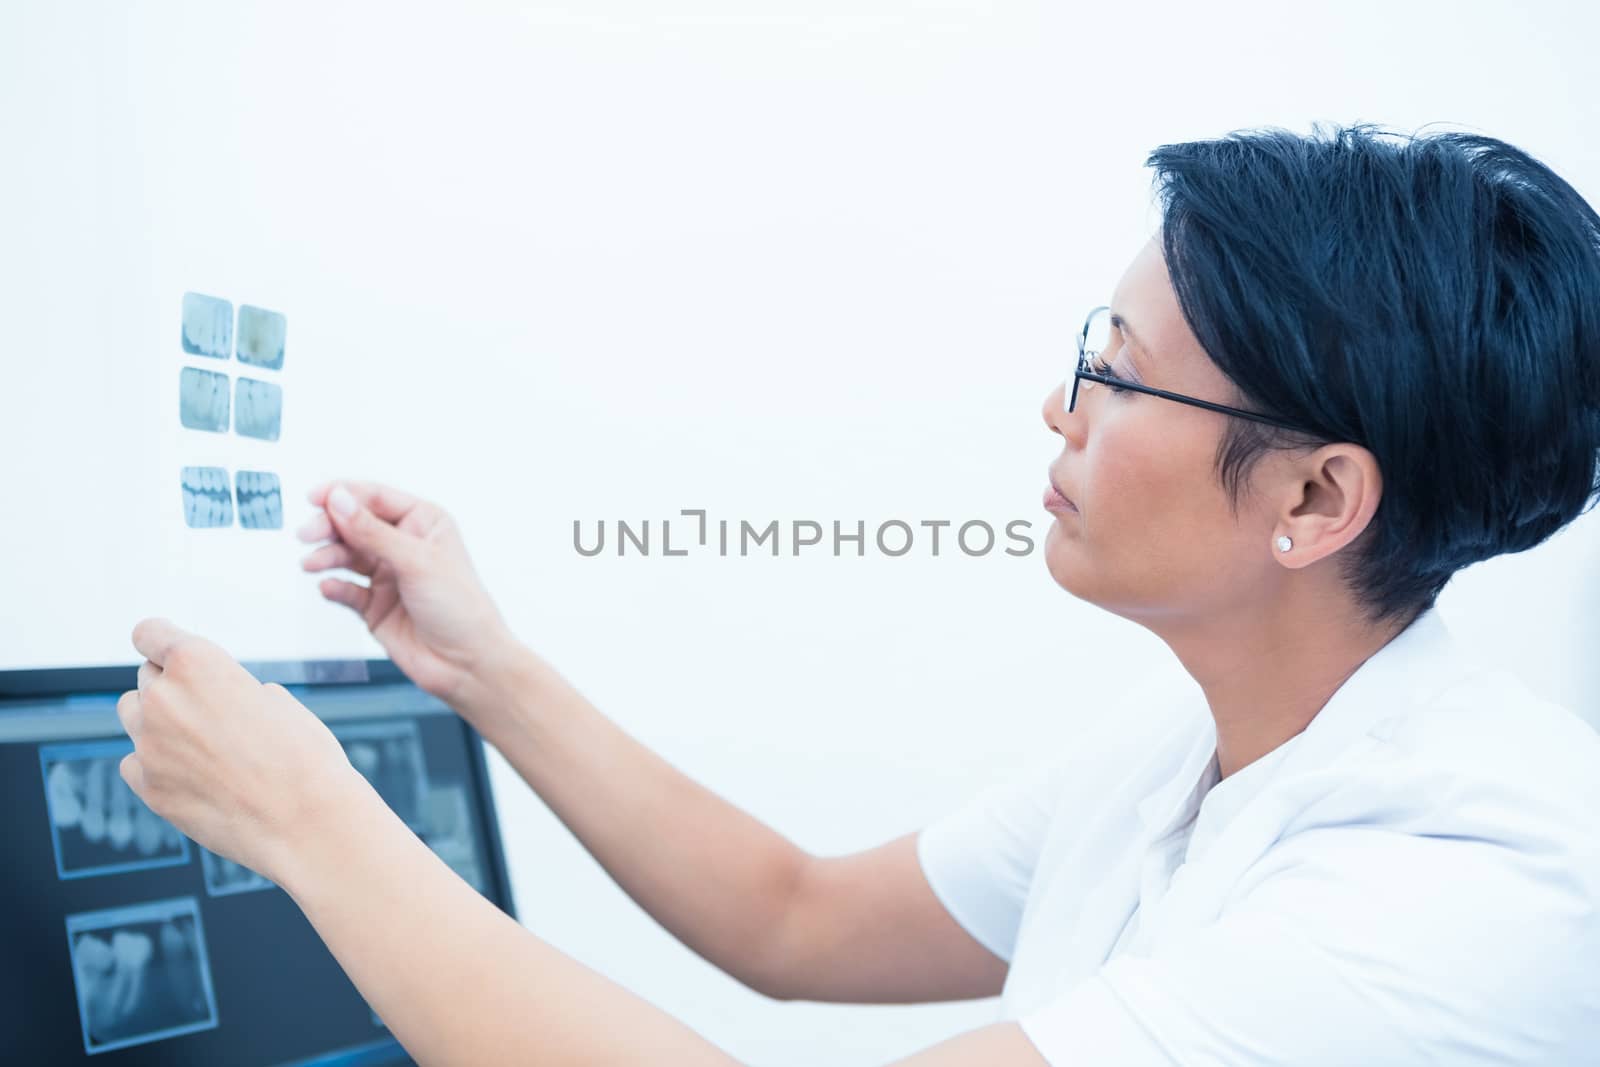 Side view of concentrated female dentist looking at x-ray